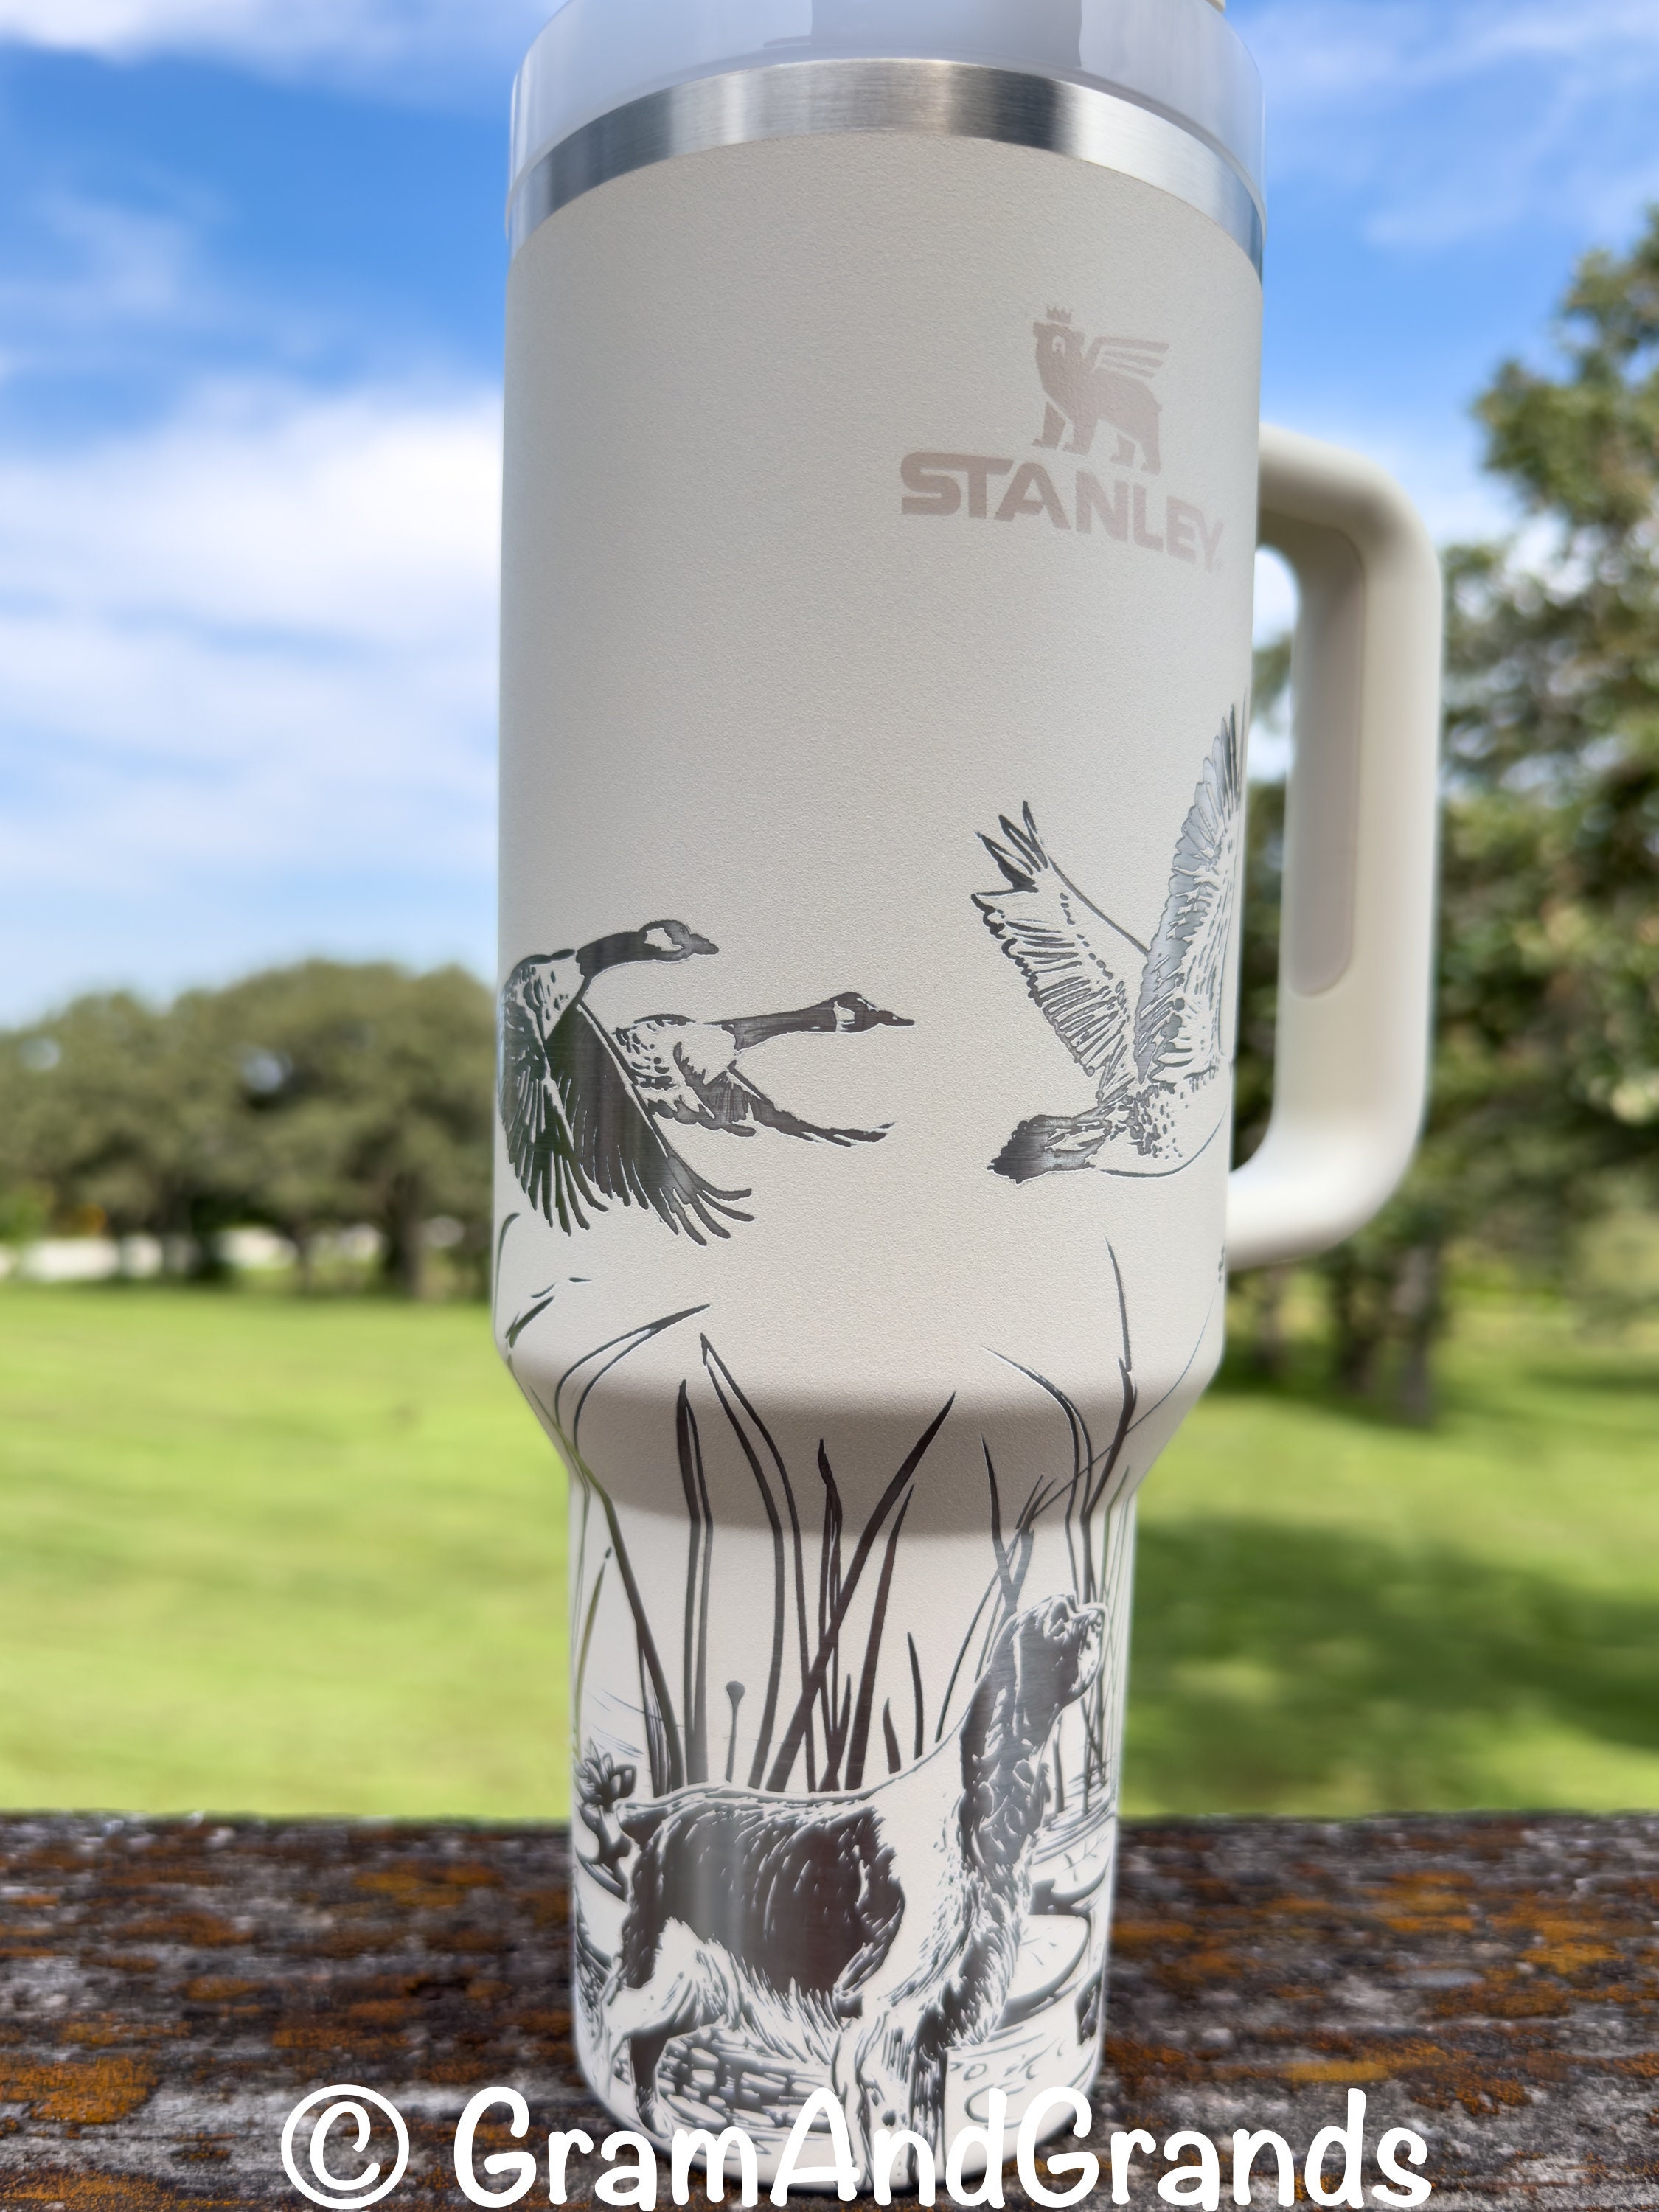 Personalized 40 oz Tumbler with Handle - Best Duckin' Dad - Duck Hunte —  Wichita Gift Company